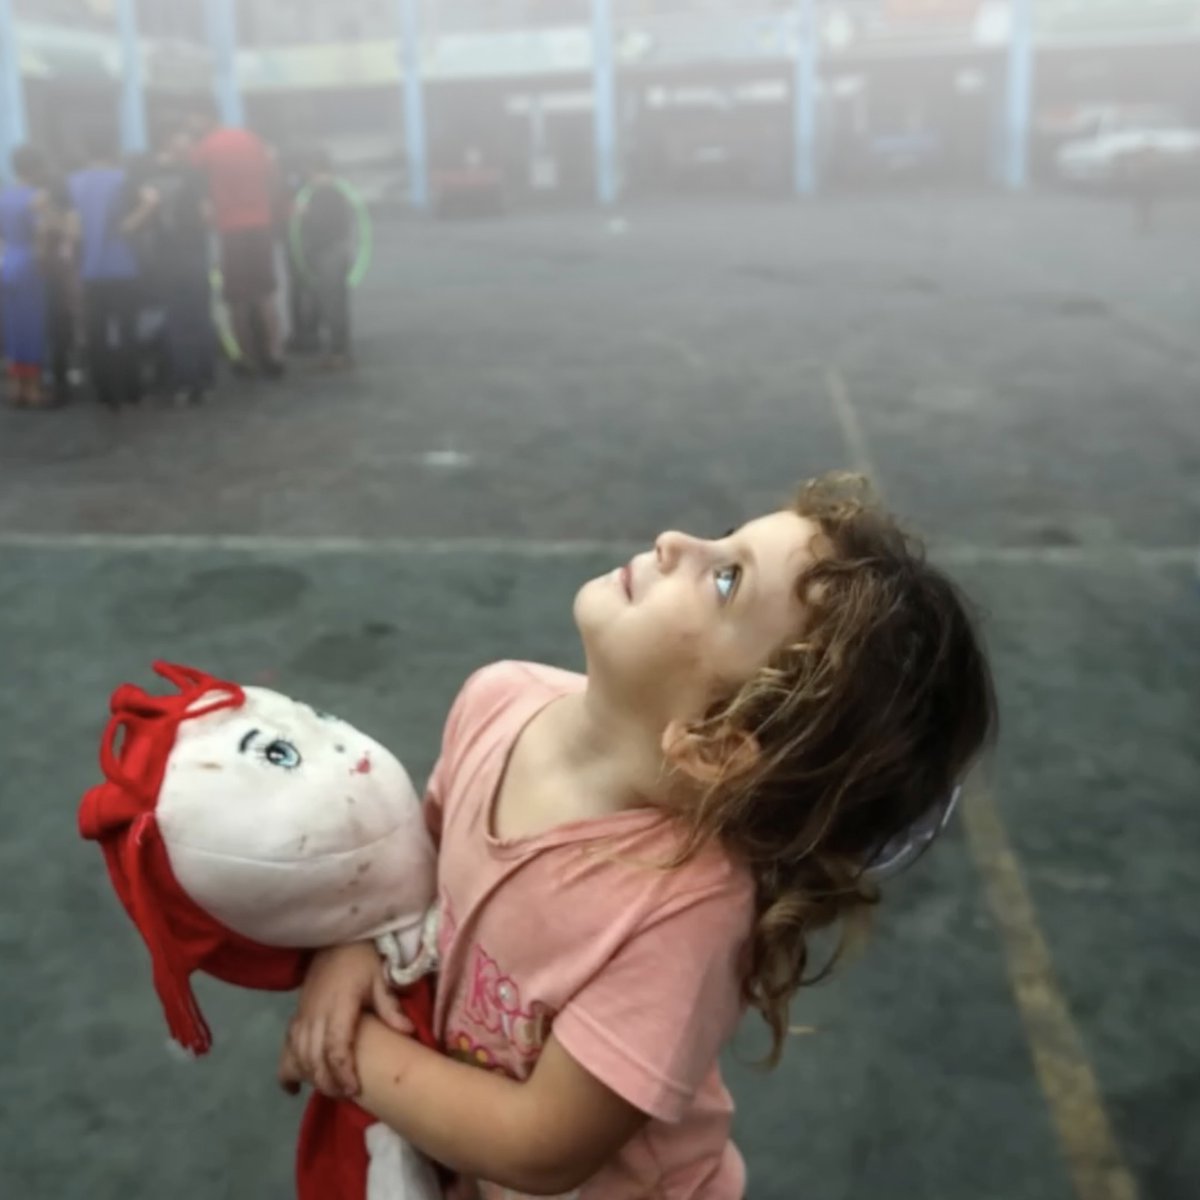 ‘Letter to the Children of Gaza’ You are afraid. Explosion after explosion. You cry. You cling to your doll. You see the white light of the missile and wait for the blast. Why do they kill children? What did you do? Why can’t anyone protect you? Will you be wounded? Will you lose…